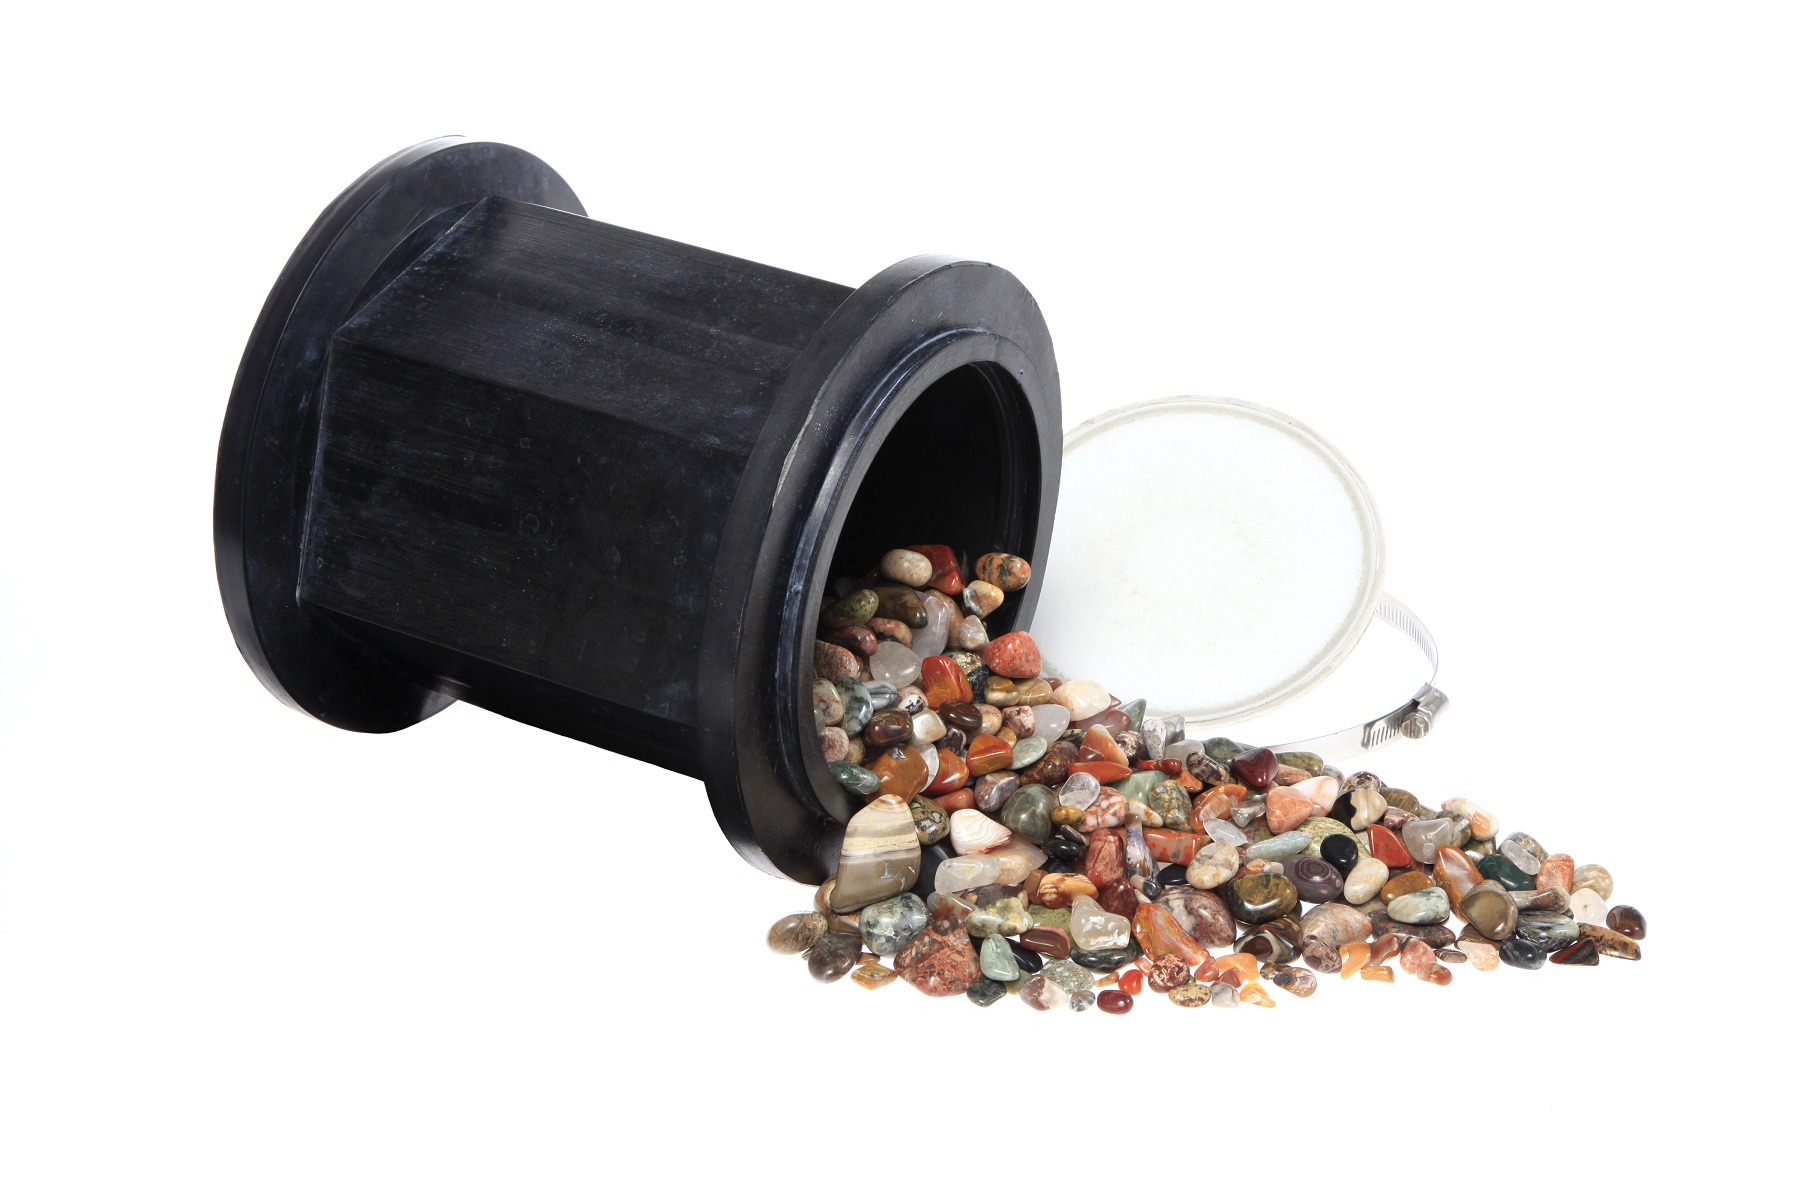 3LB] Professional Rock Polisher Tumbler Kit Includes Rough Gemstones, Quiet  Rock Tumbler with Rubber Barrel Could Continue 7 Days Polishing Electric  Rock Tumbler Machine